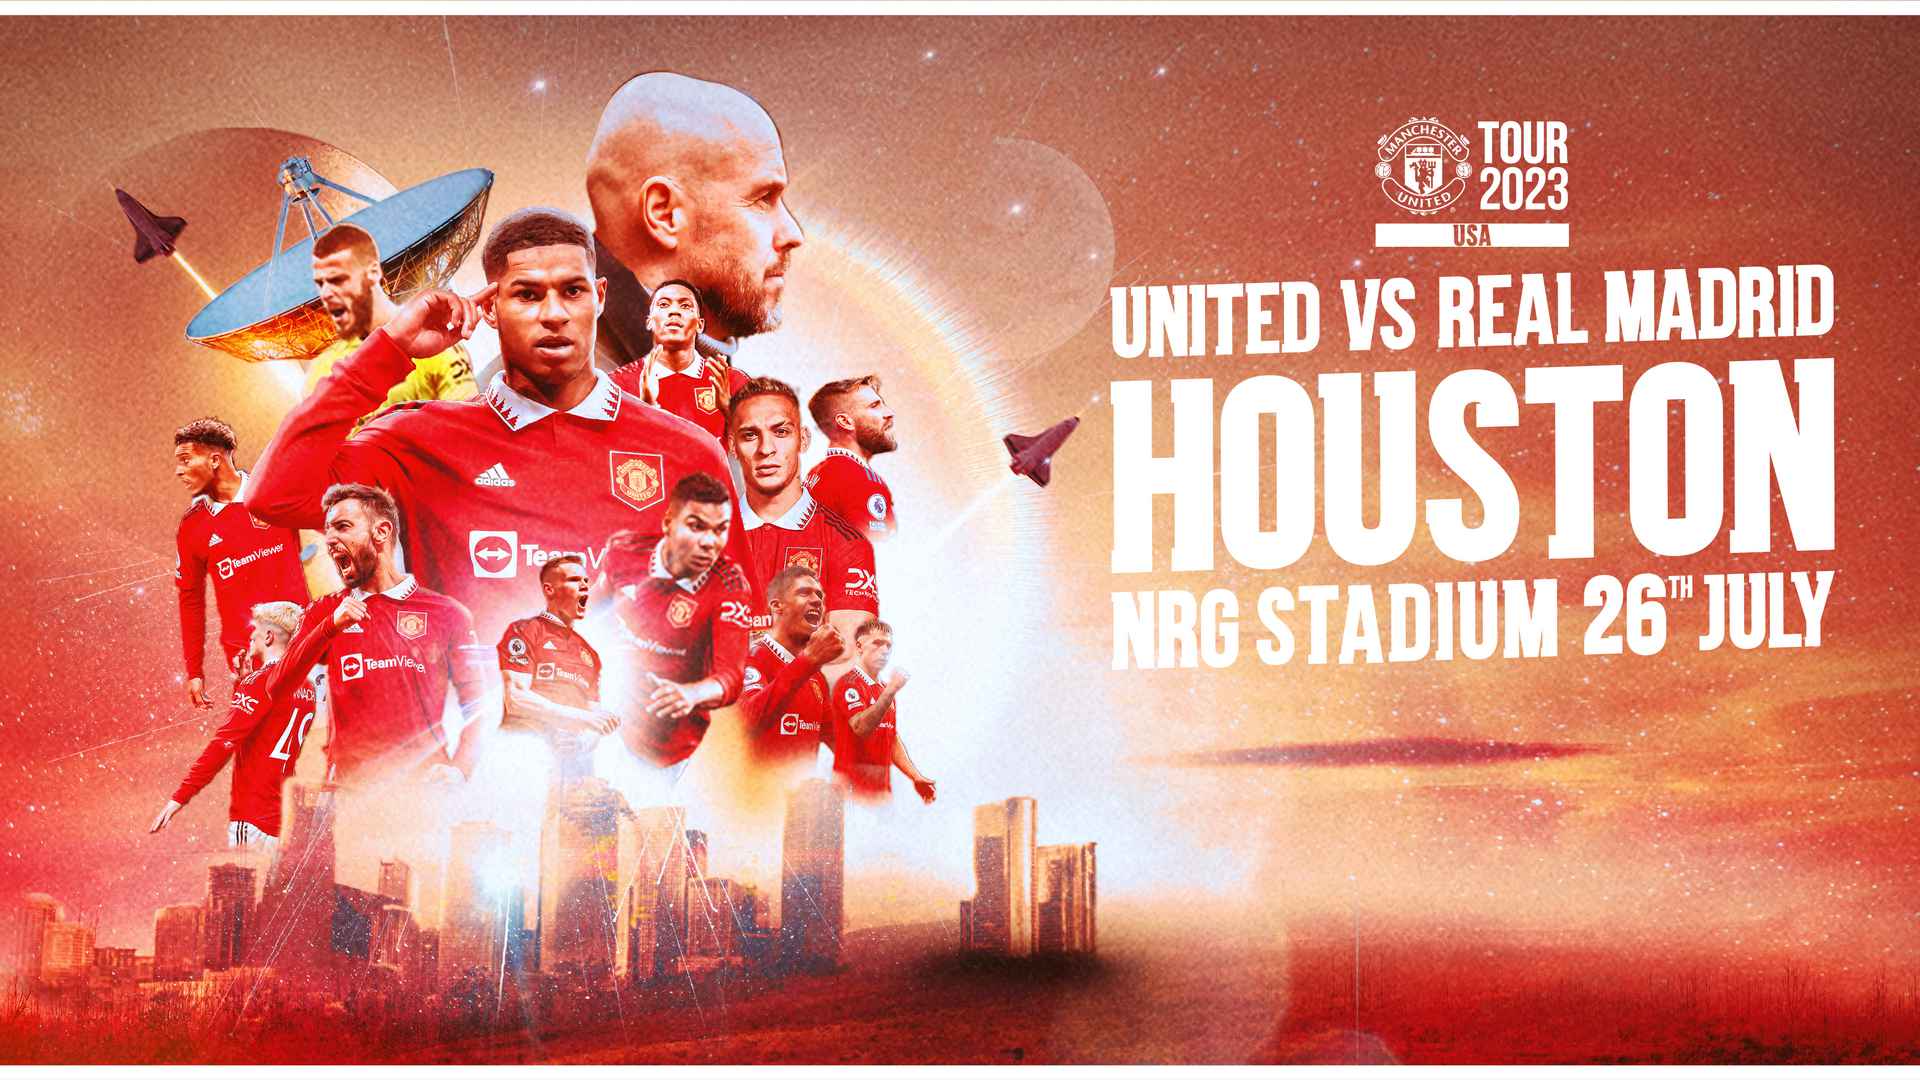 Man Utd to play Real Madrid friendly in Houston during Tour 2023 | Manchester United